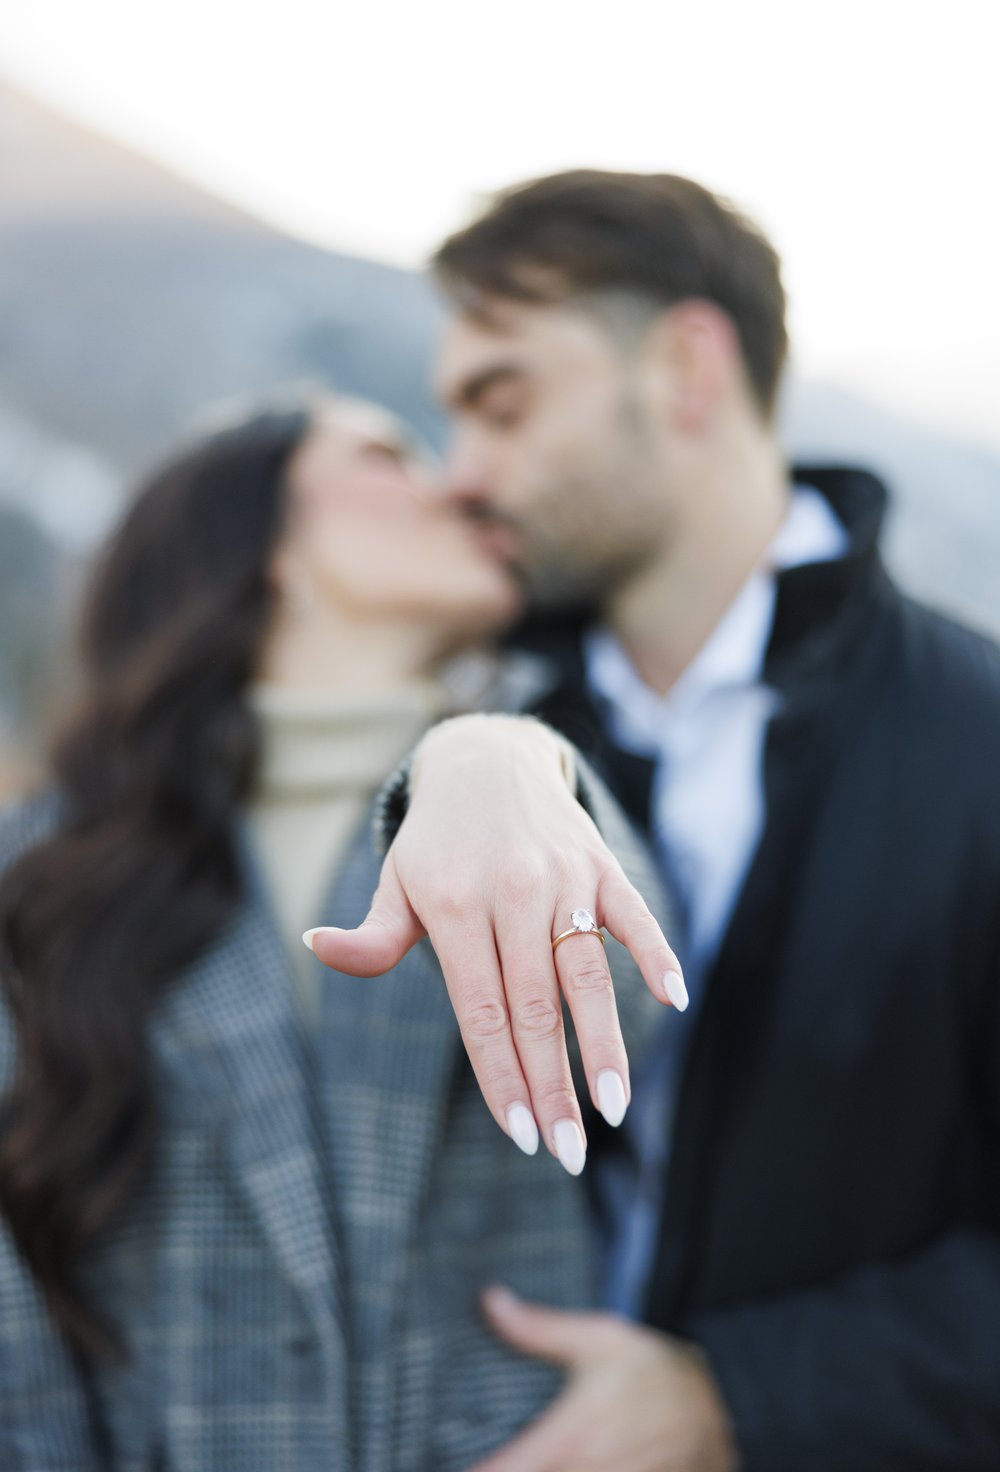  Savanna Richardson Photography captures a man and woman kissing while showing off the wedding ring during an engagement. proposal #SavannaRichardsonPhotography #Proposal #proposalphotography #ProProposalCompany #engaged #engagementphotography 